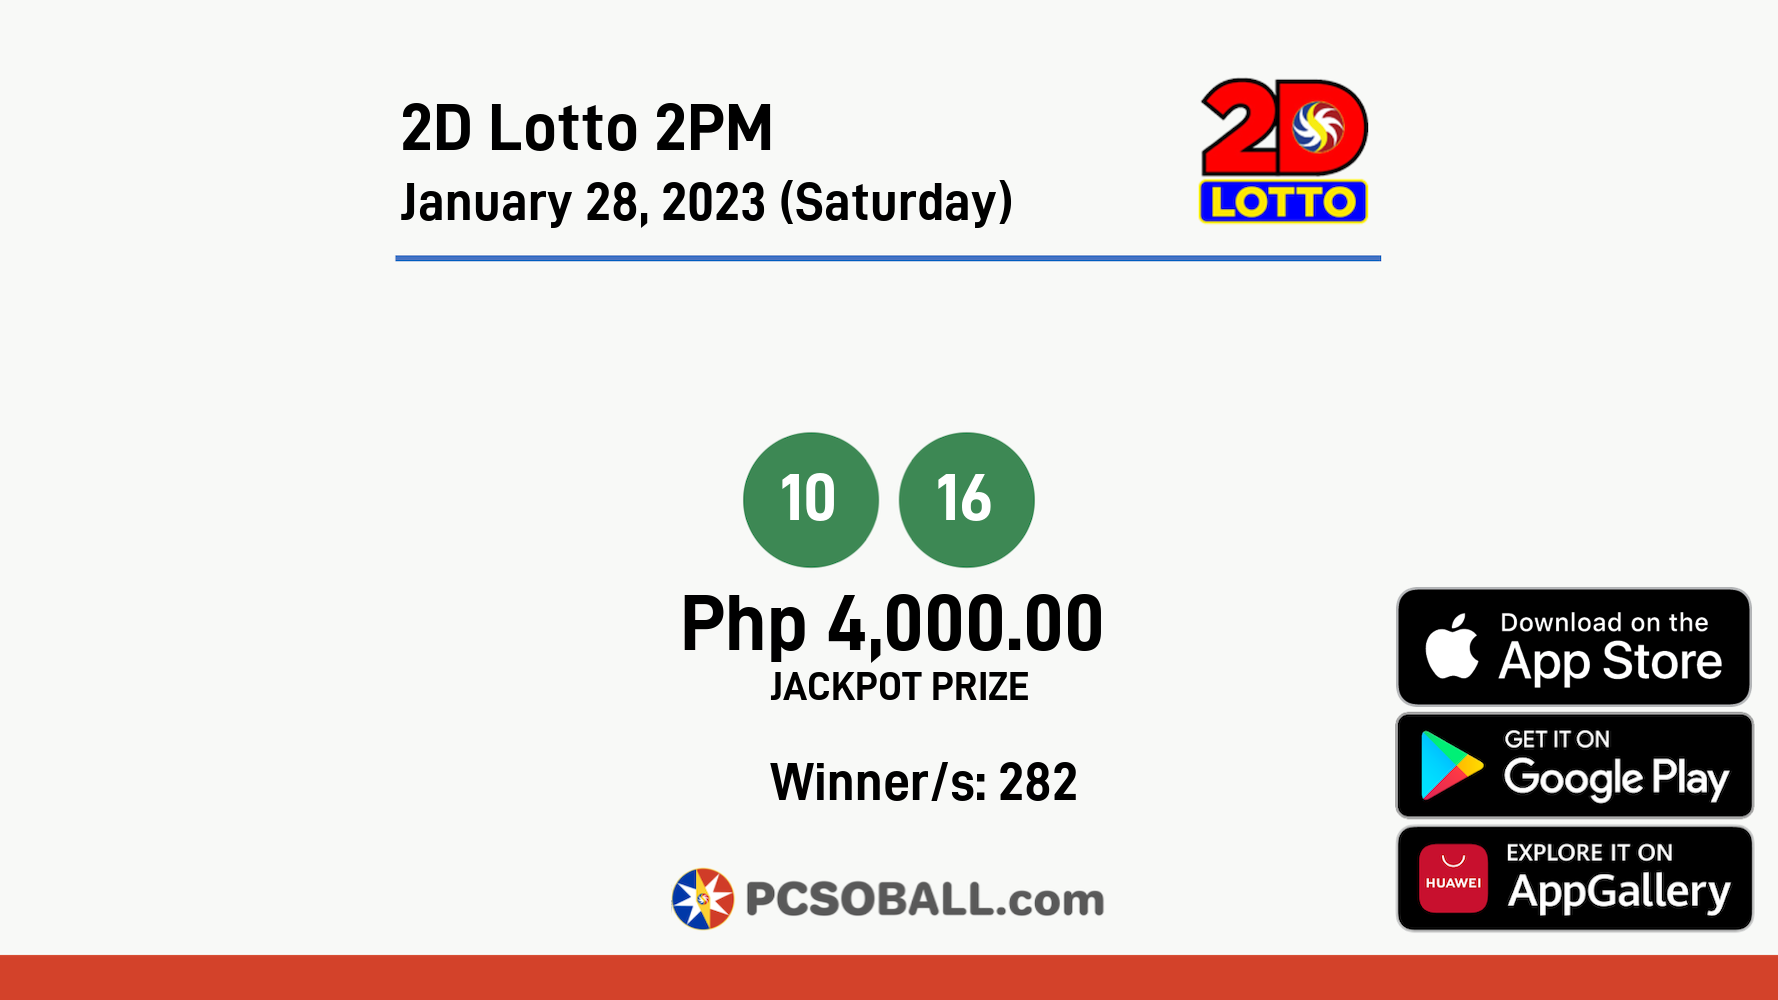 2D Lotto 2PM January 28, 2023 (Saturday) Result